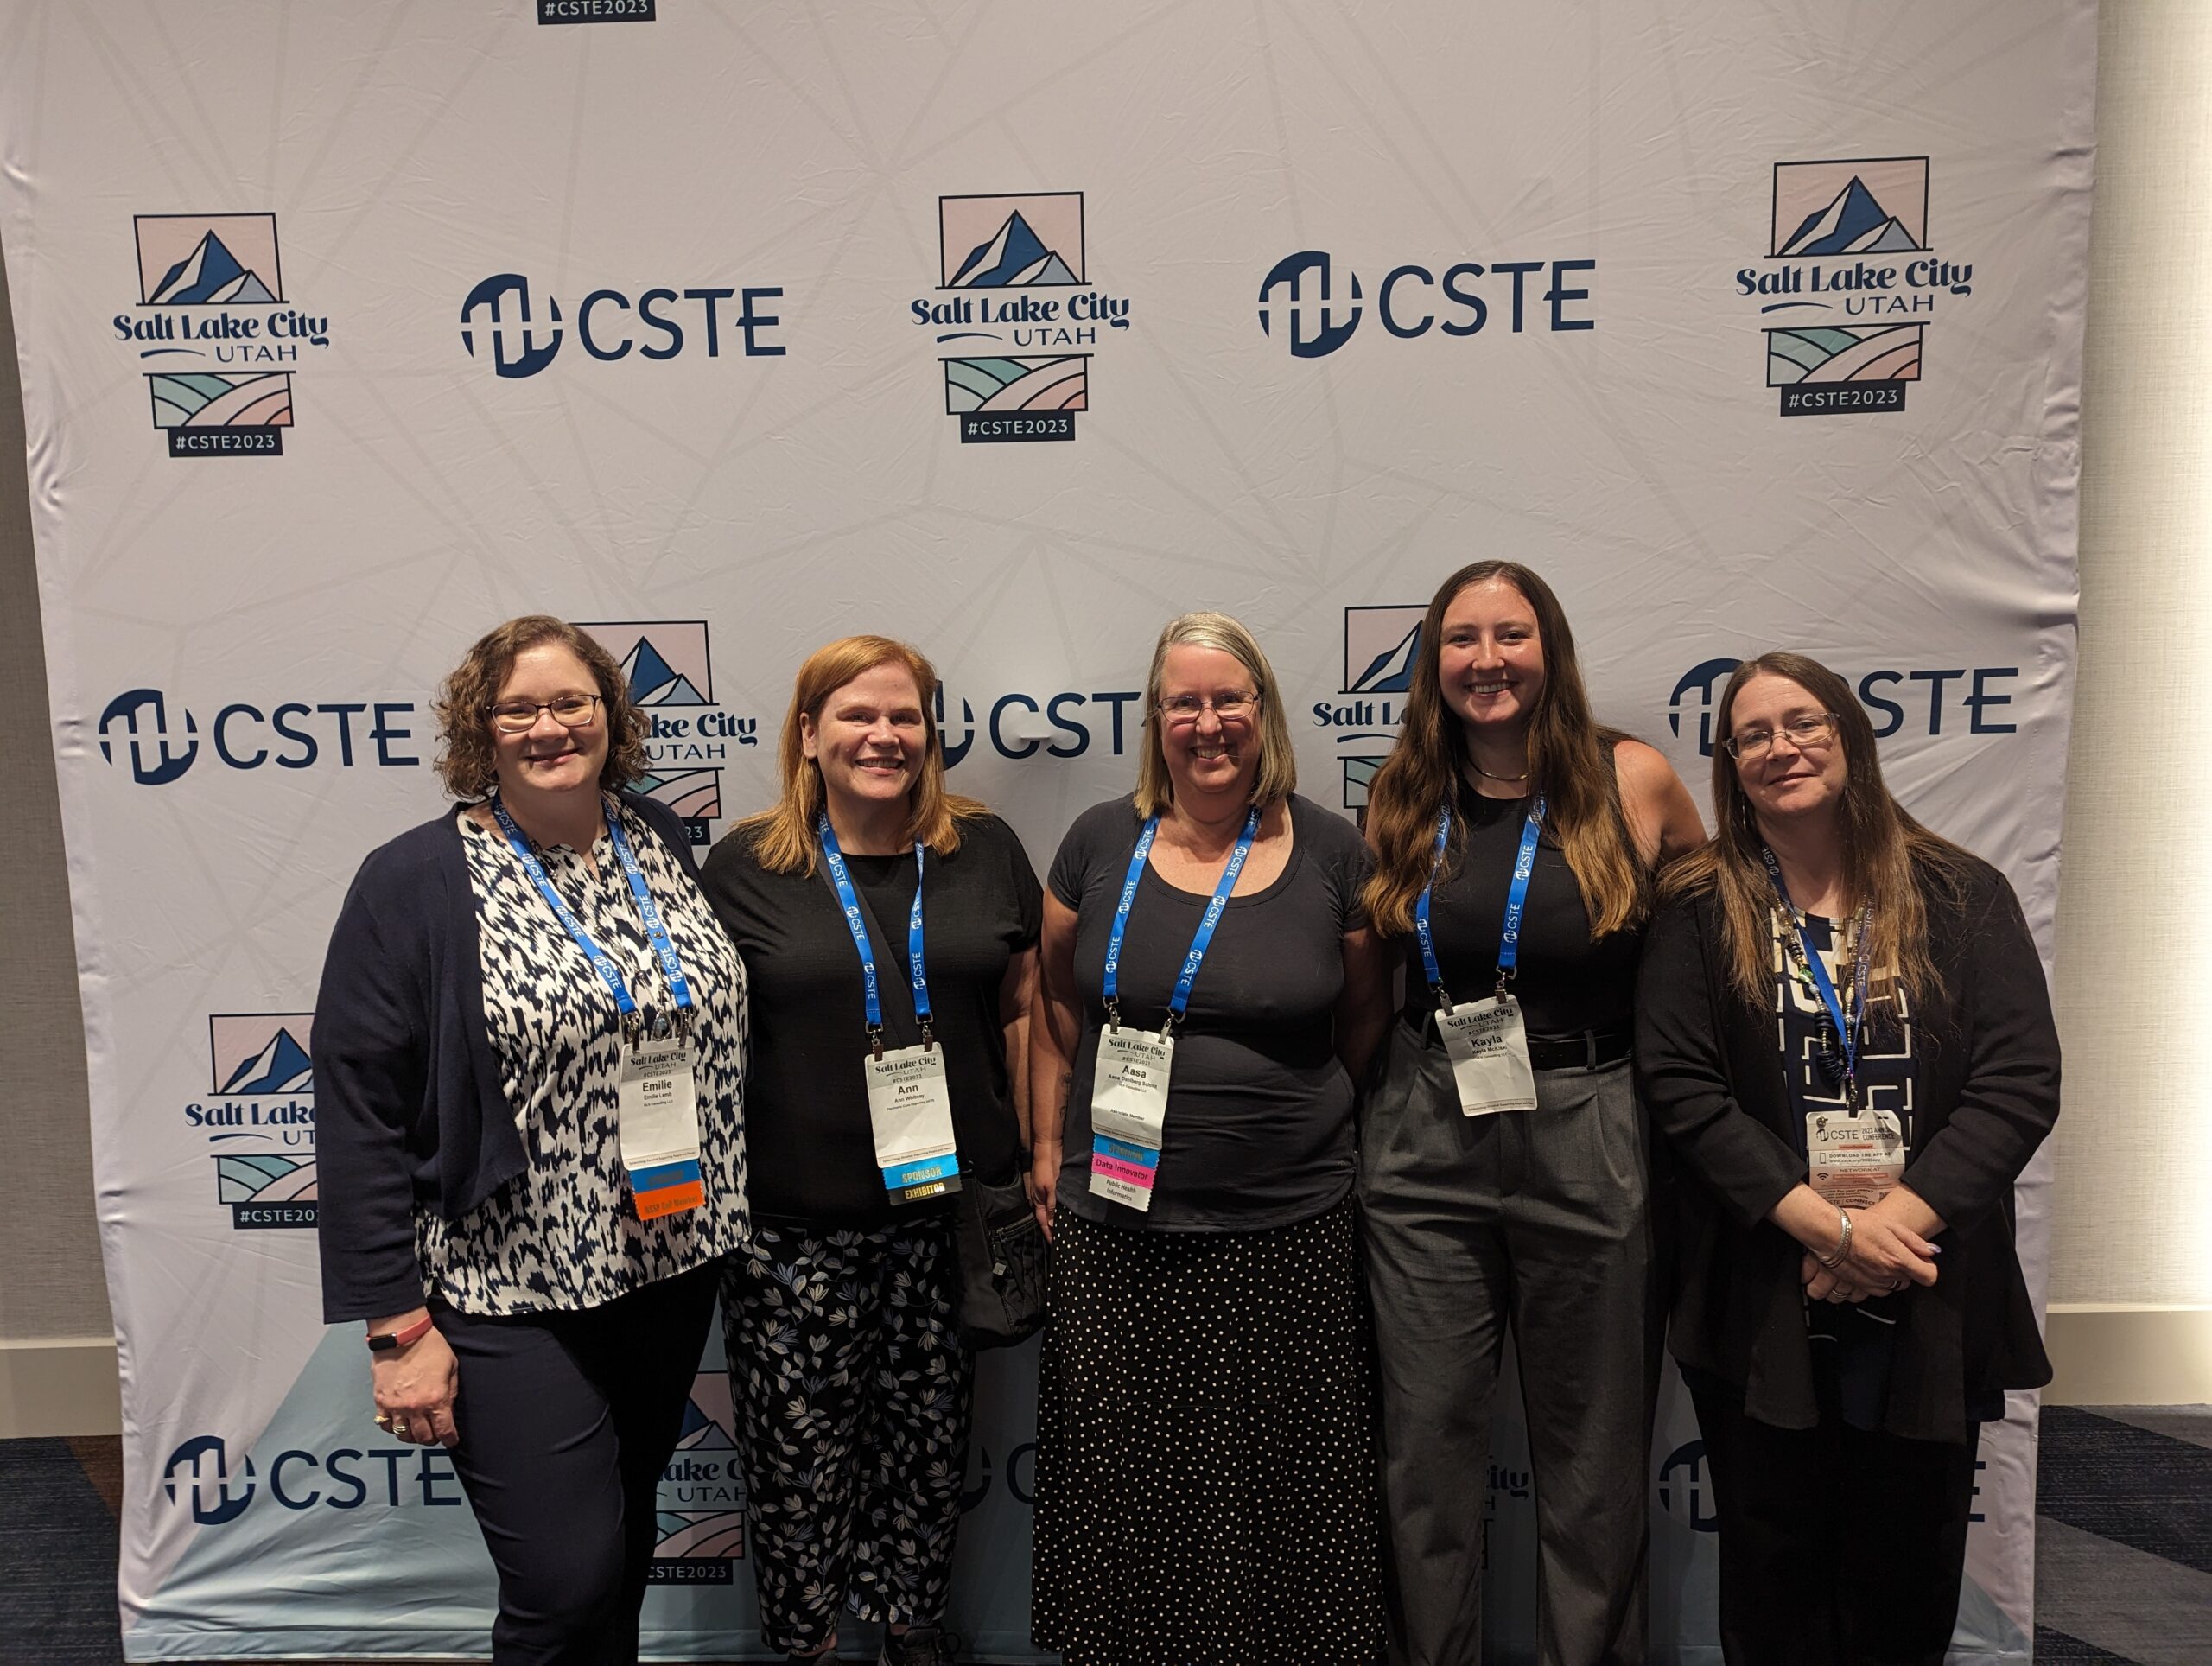 Two conferences, two cities, different perspectives (CSTE and NACCHO)